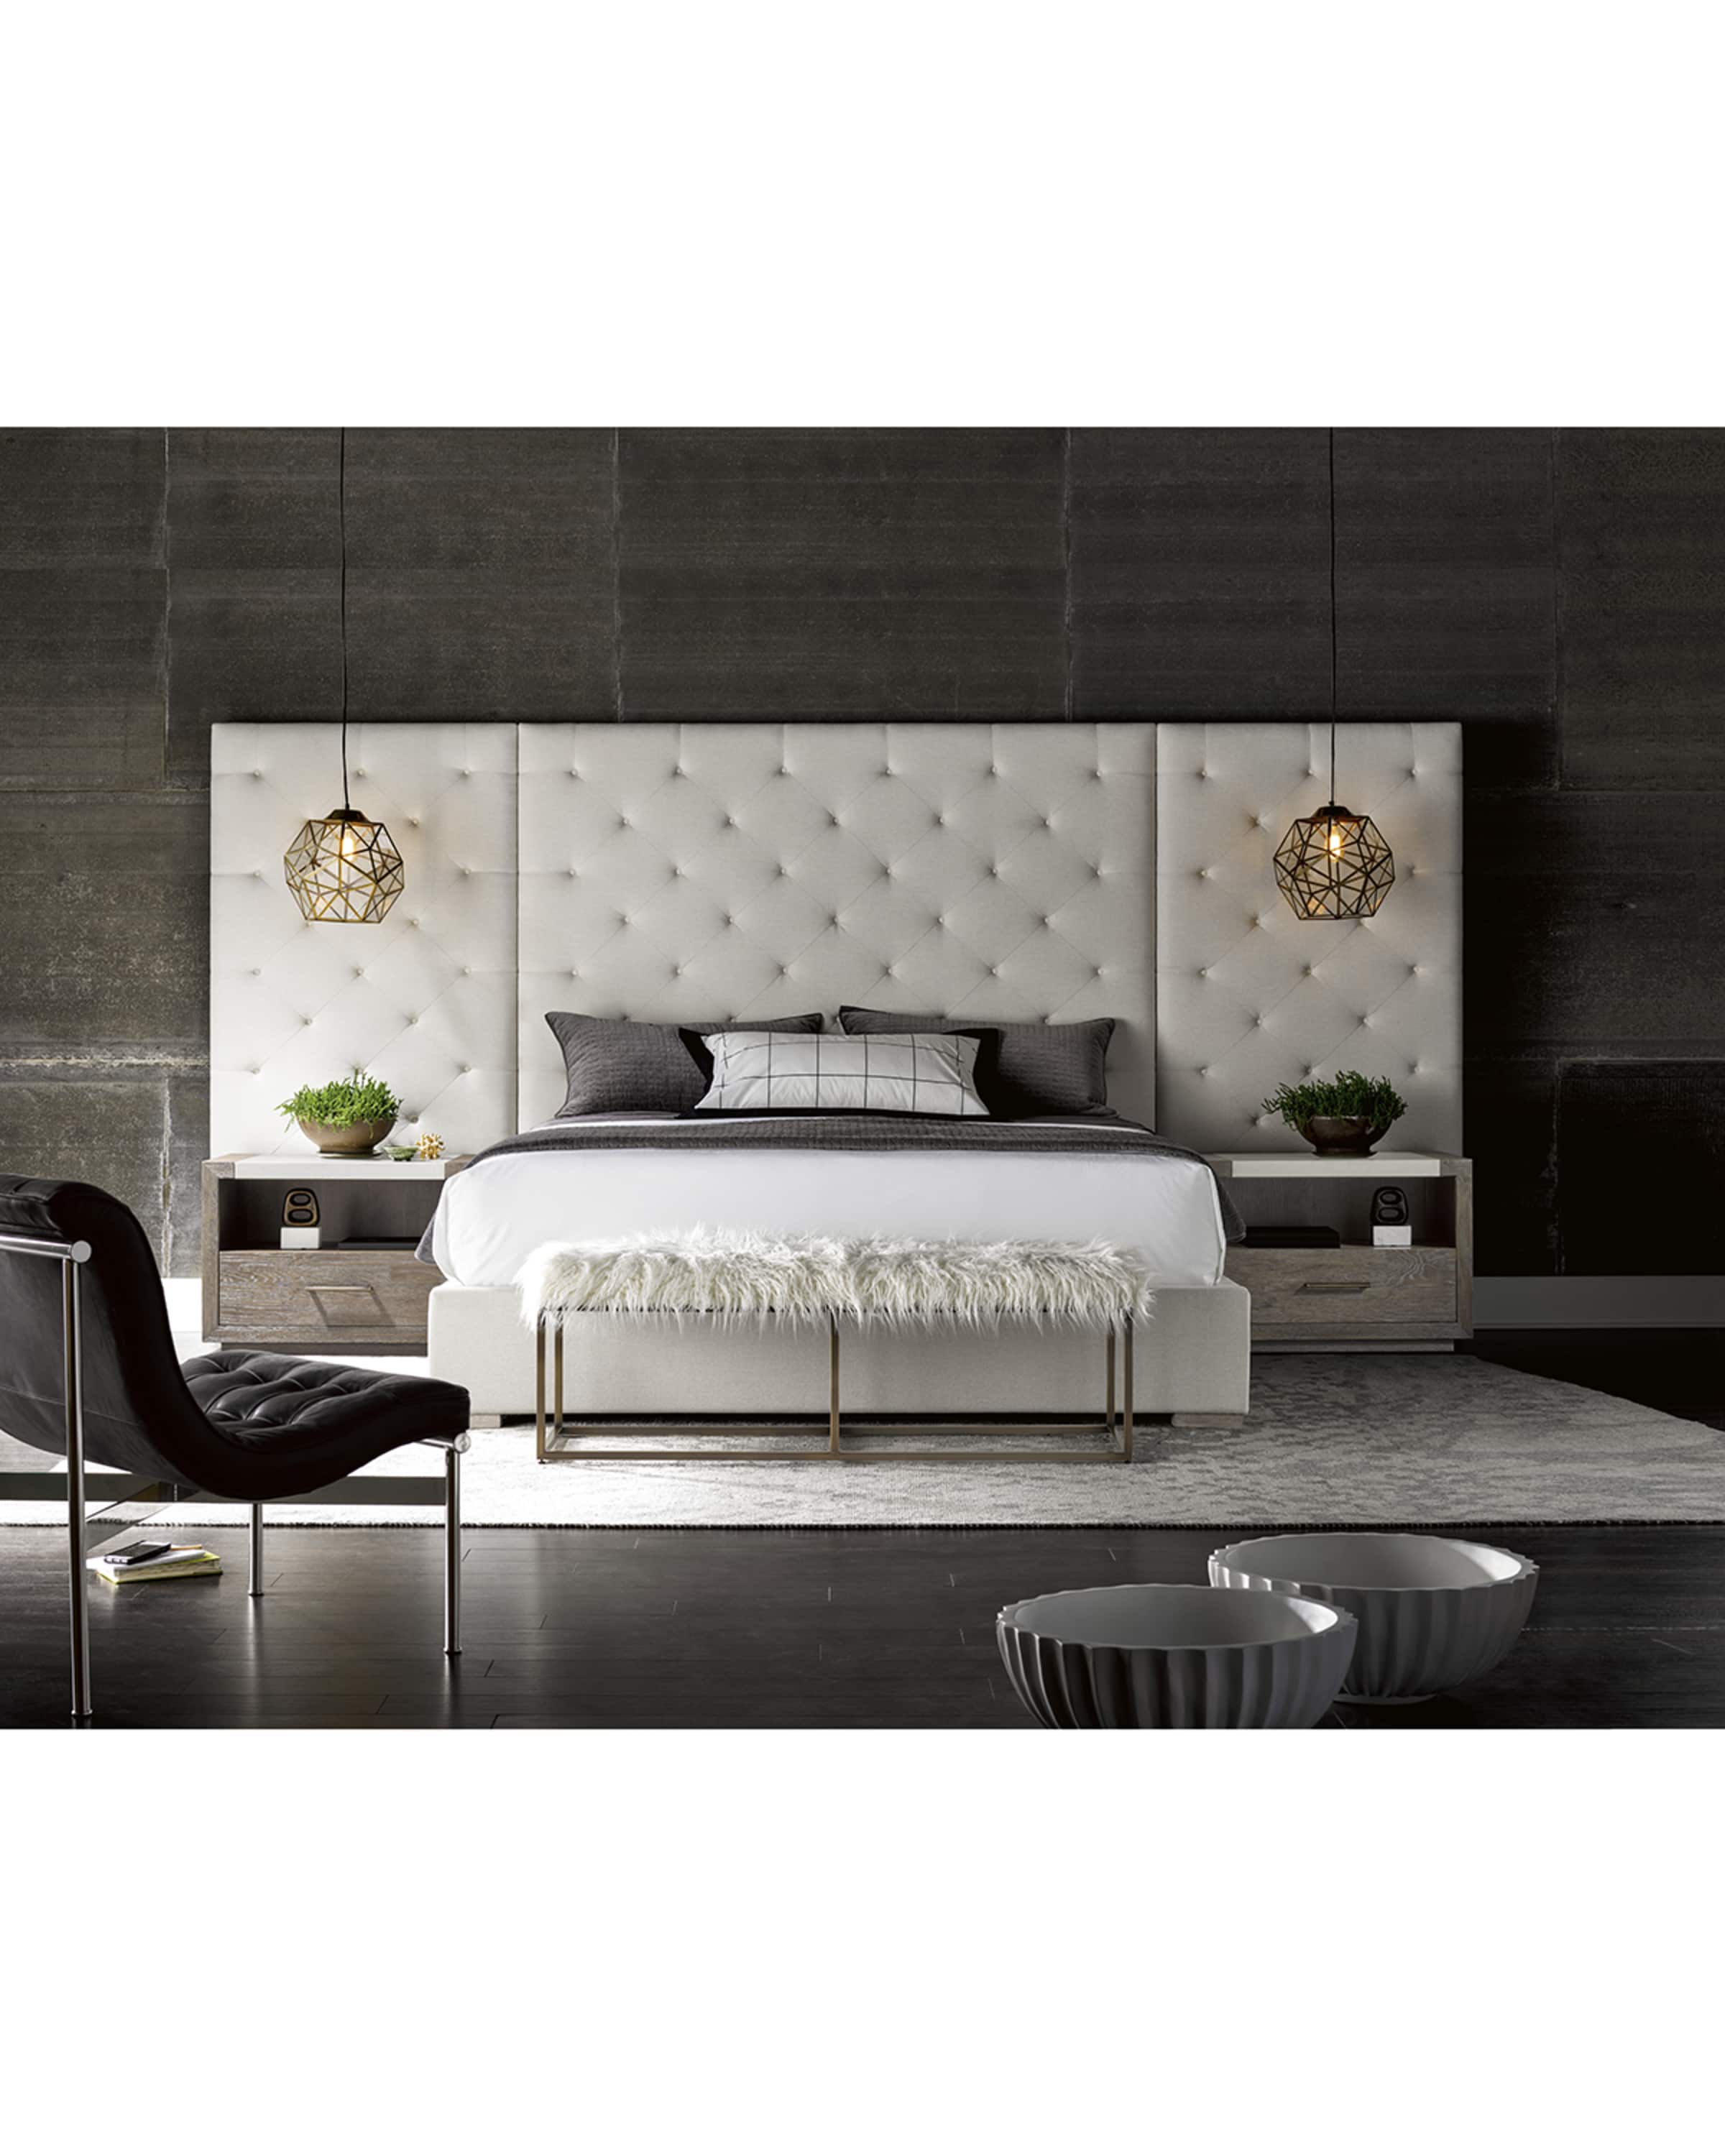 Universal Furniture Parigi Tufted California King Bed with Panels